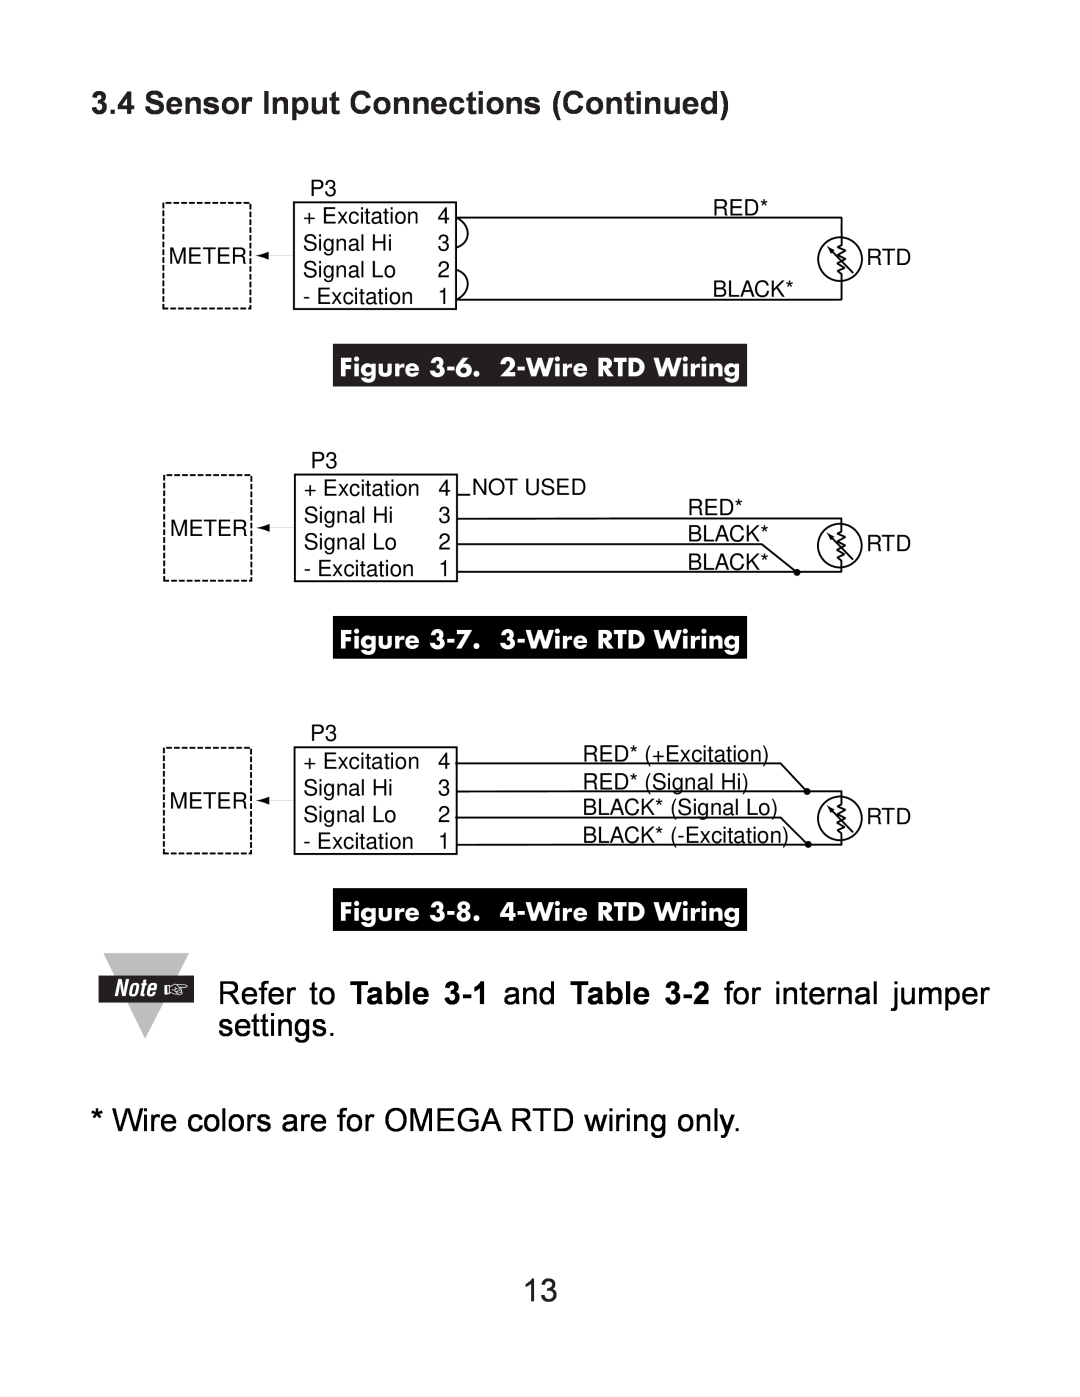 Omega DP119-RTD manual Sensor Input Connections Continued, Note Refer to -1 and -2 for internal jumper settings 